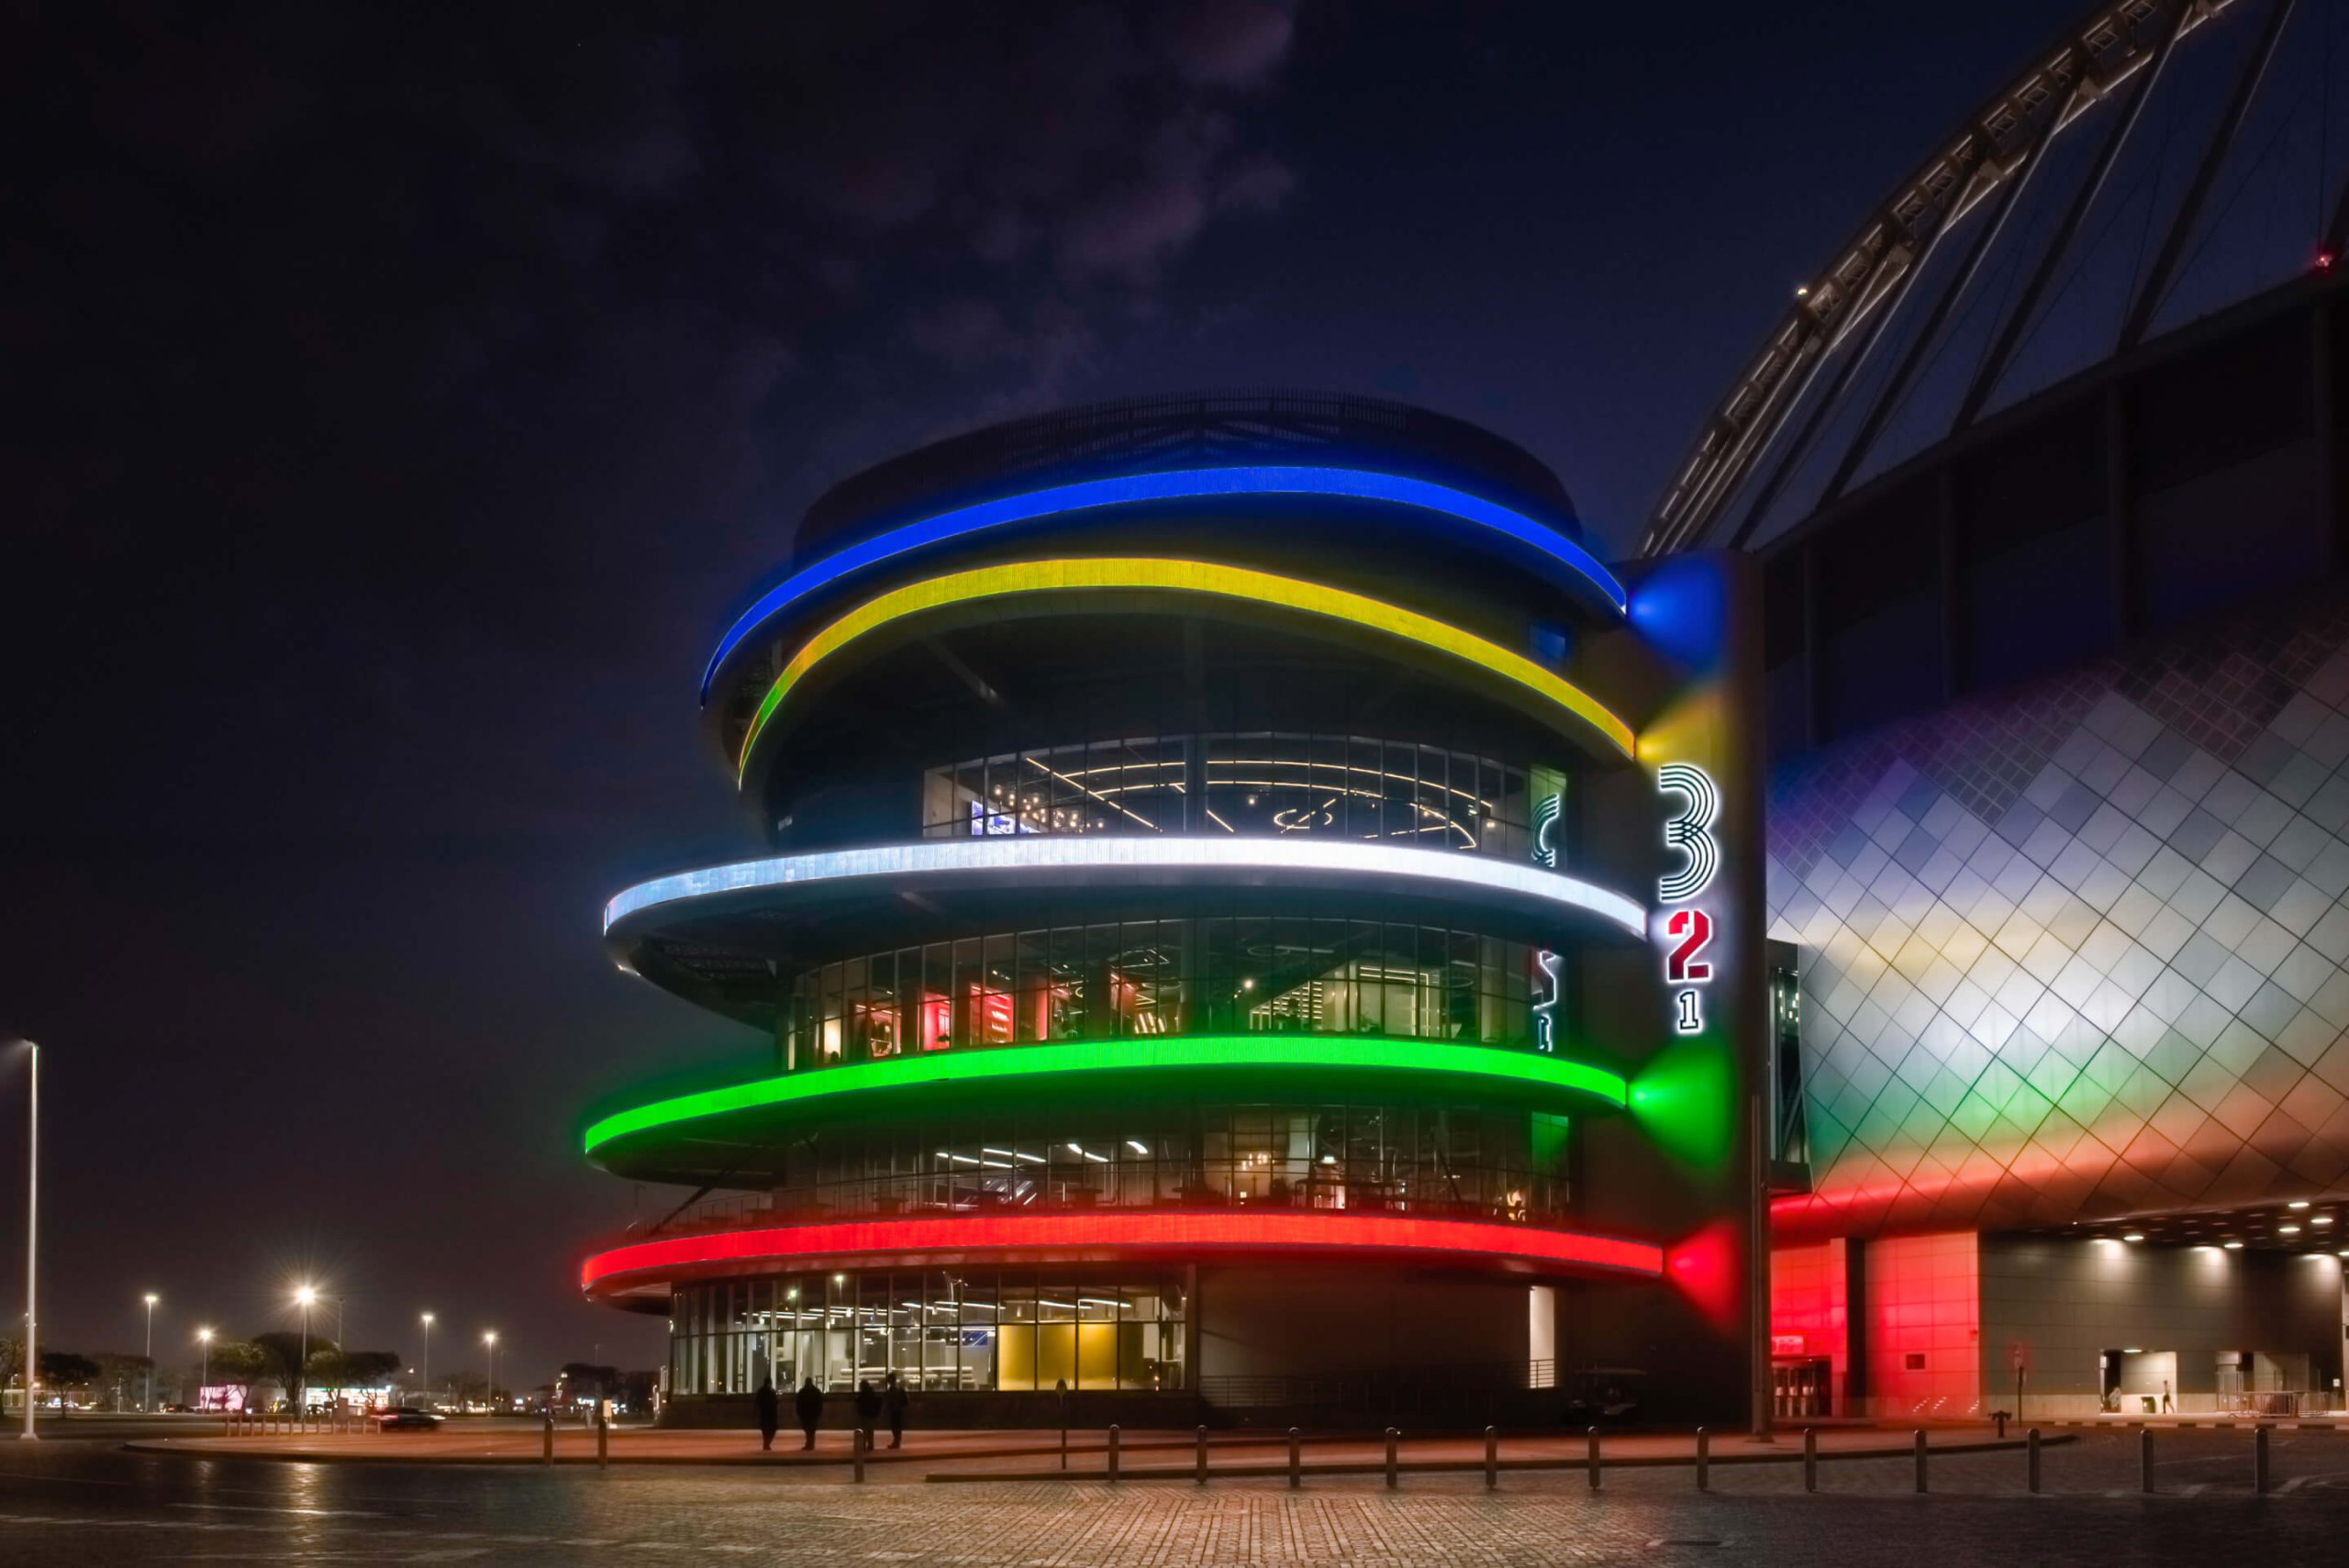 3-2-1: World’s second-largest sports museum celebrates second anniversary in Doha